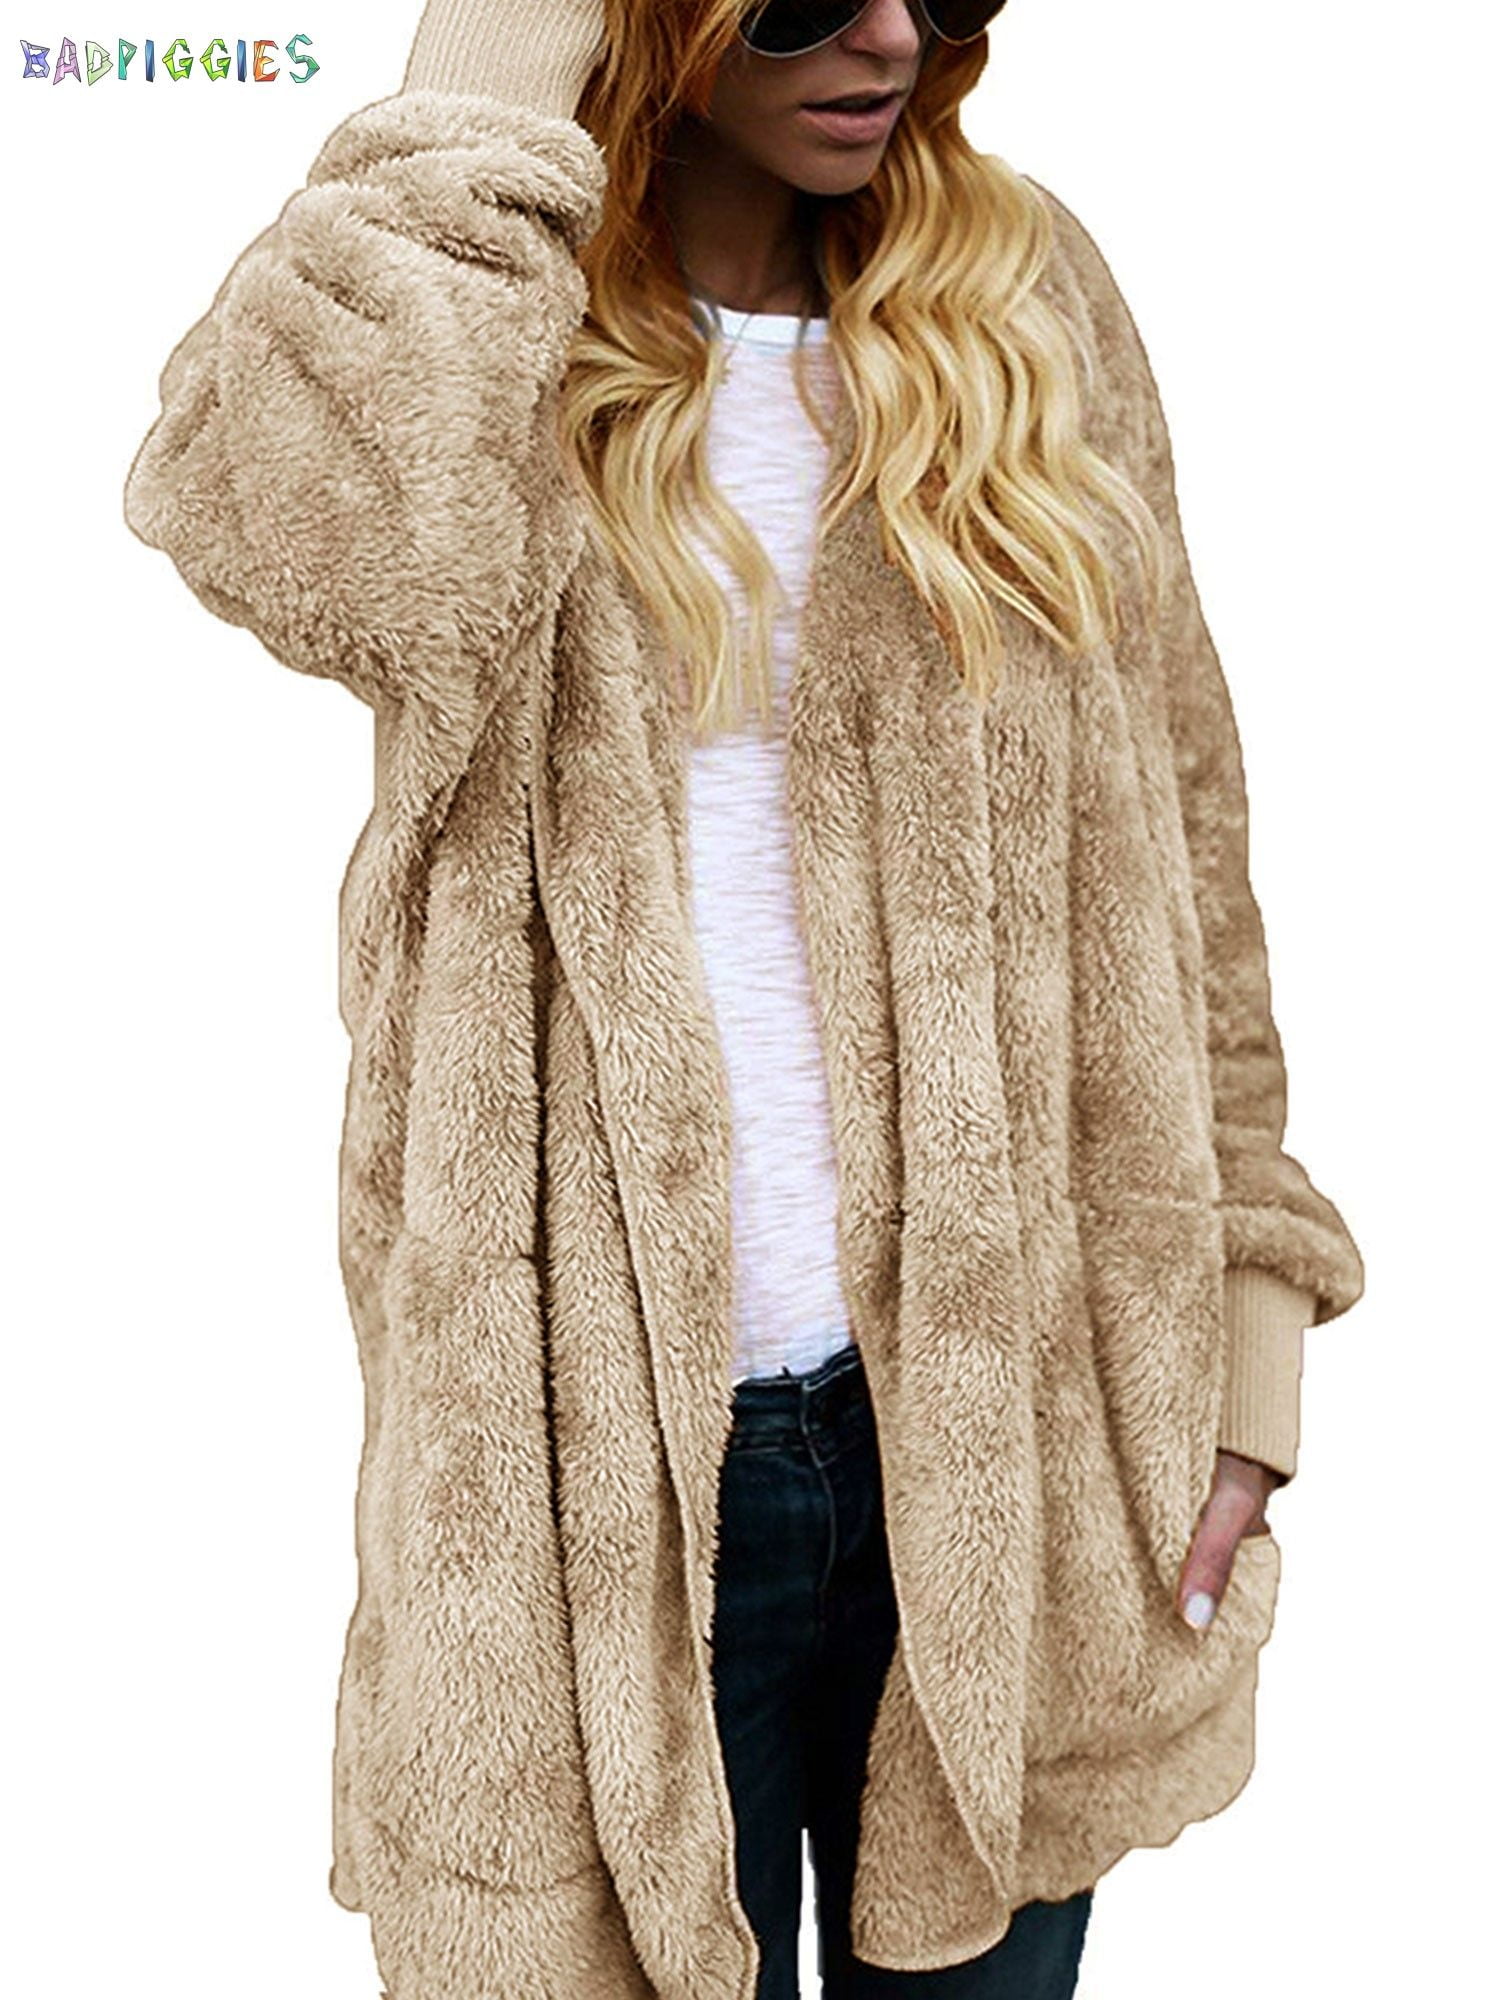 Womens Fuzzy Fleece Open Front Cardigan Solid Color Oversized Coats Outwear Hoodies Jackets with Pockets